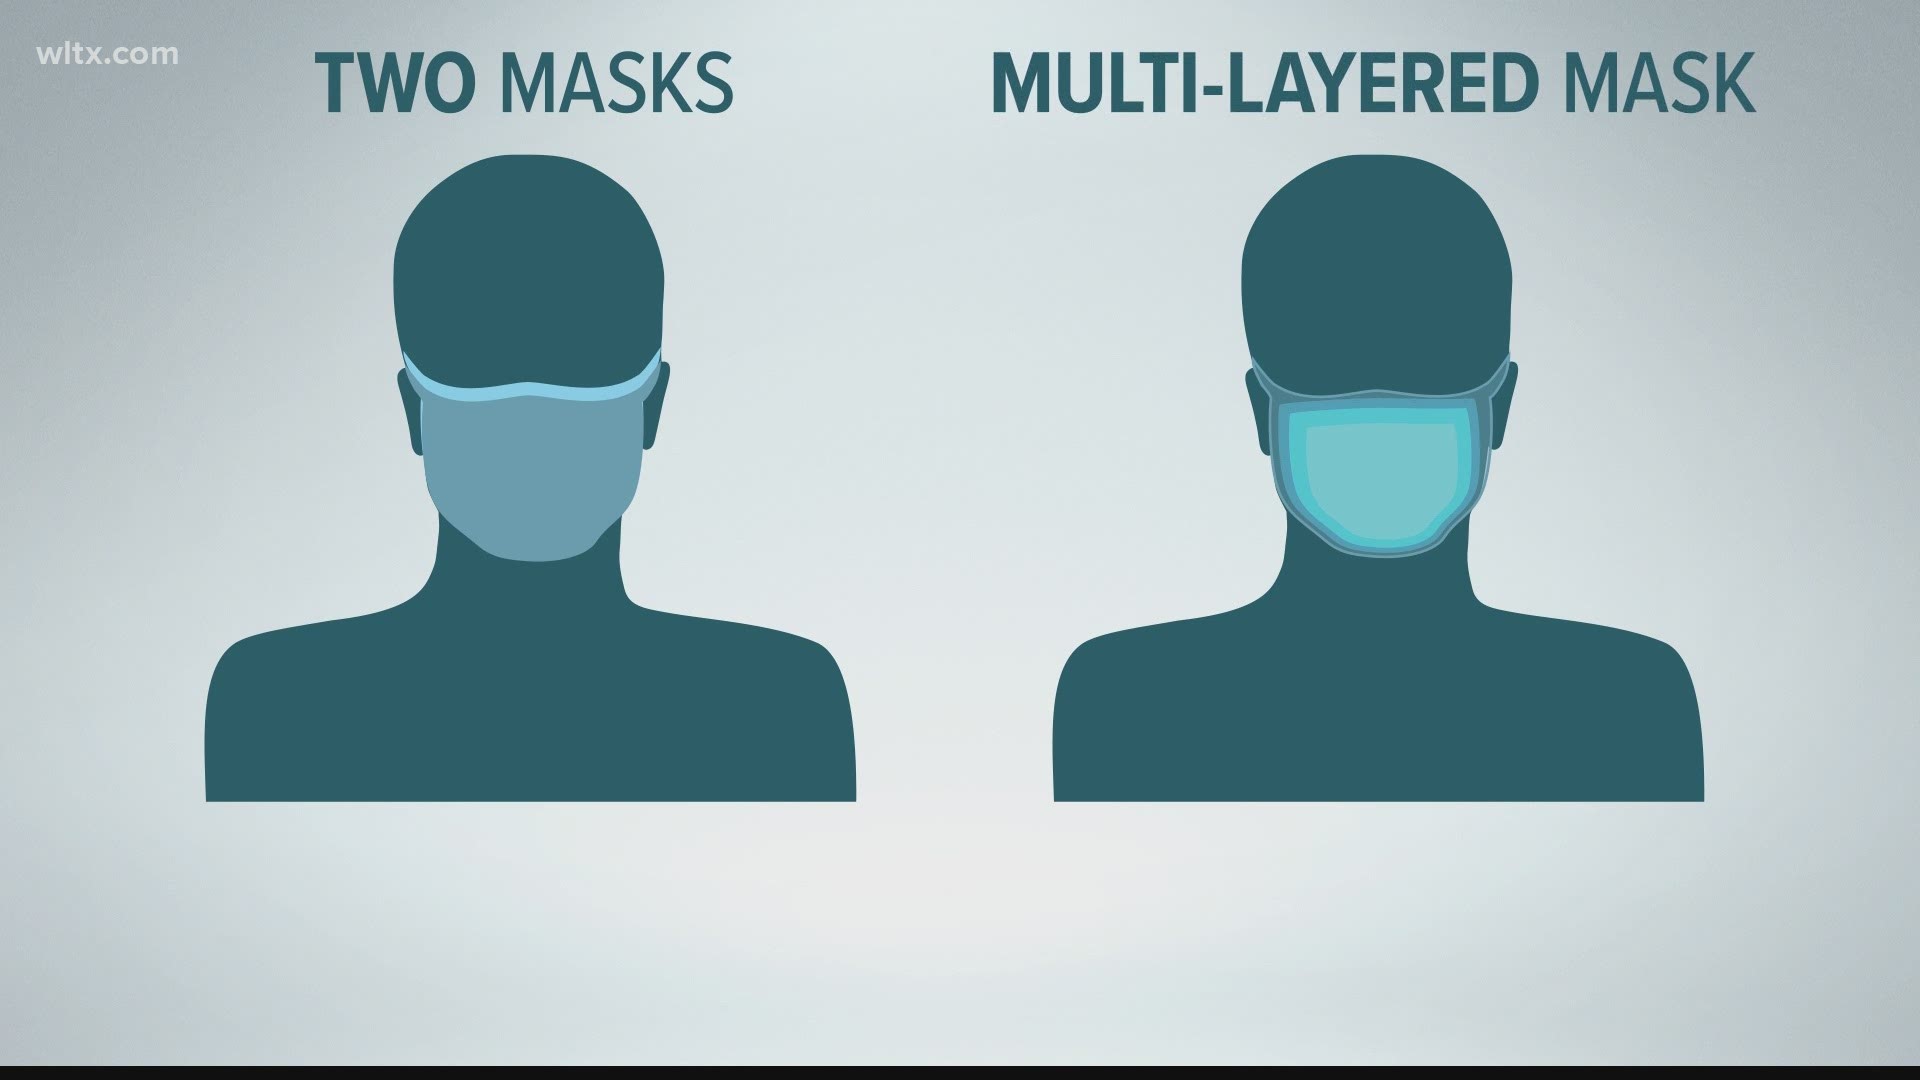 Medical experts now say wearing two masks may be better than one.